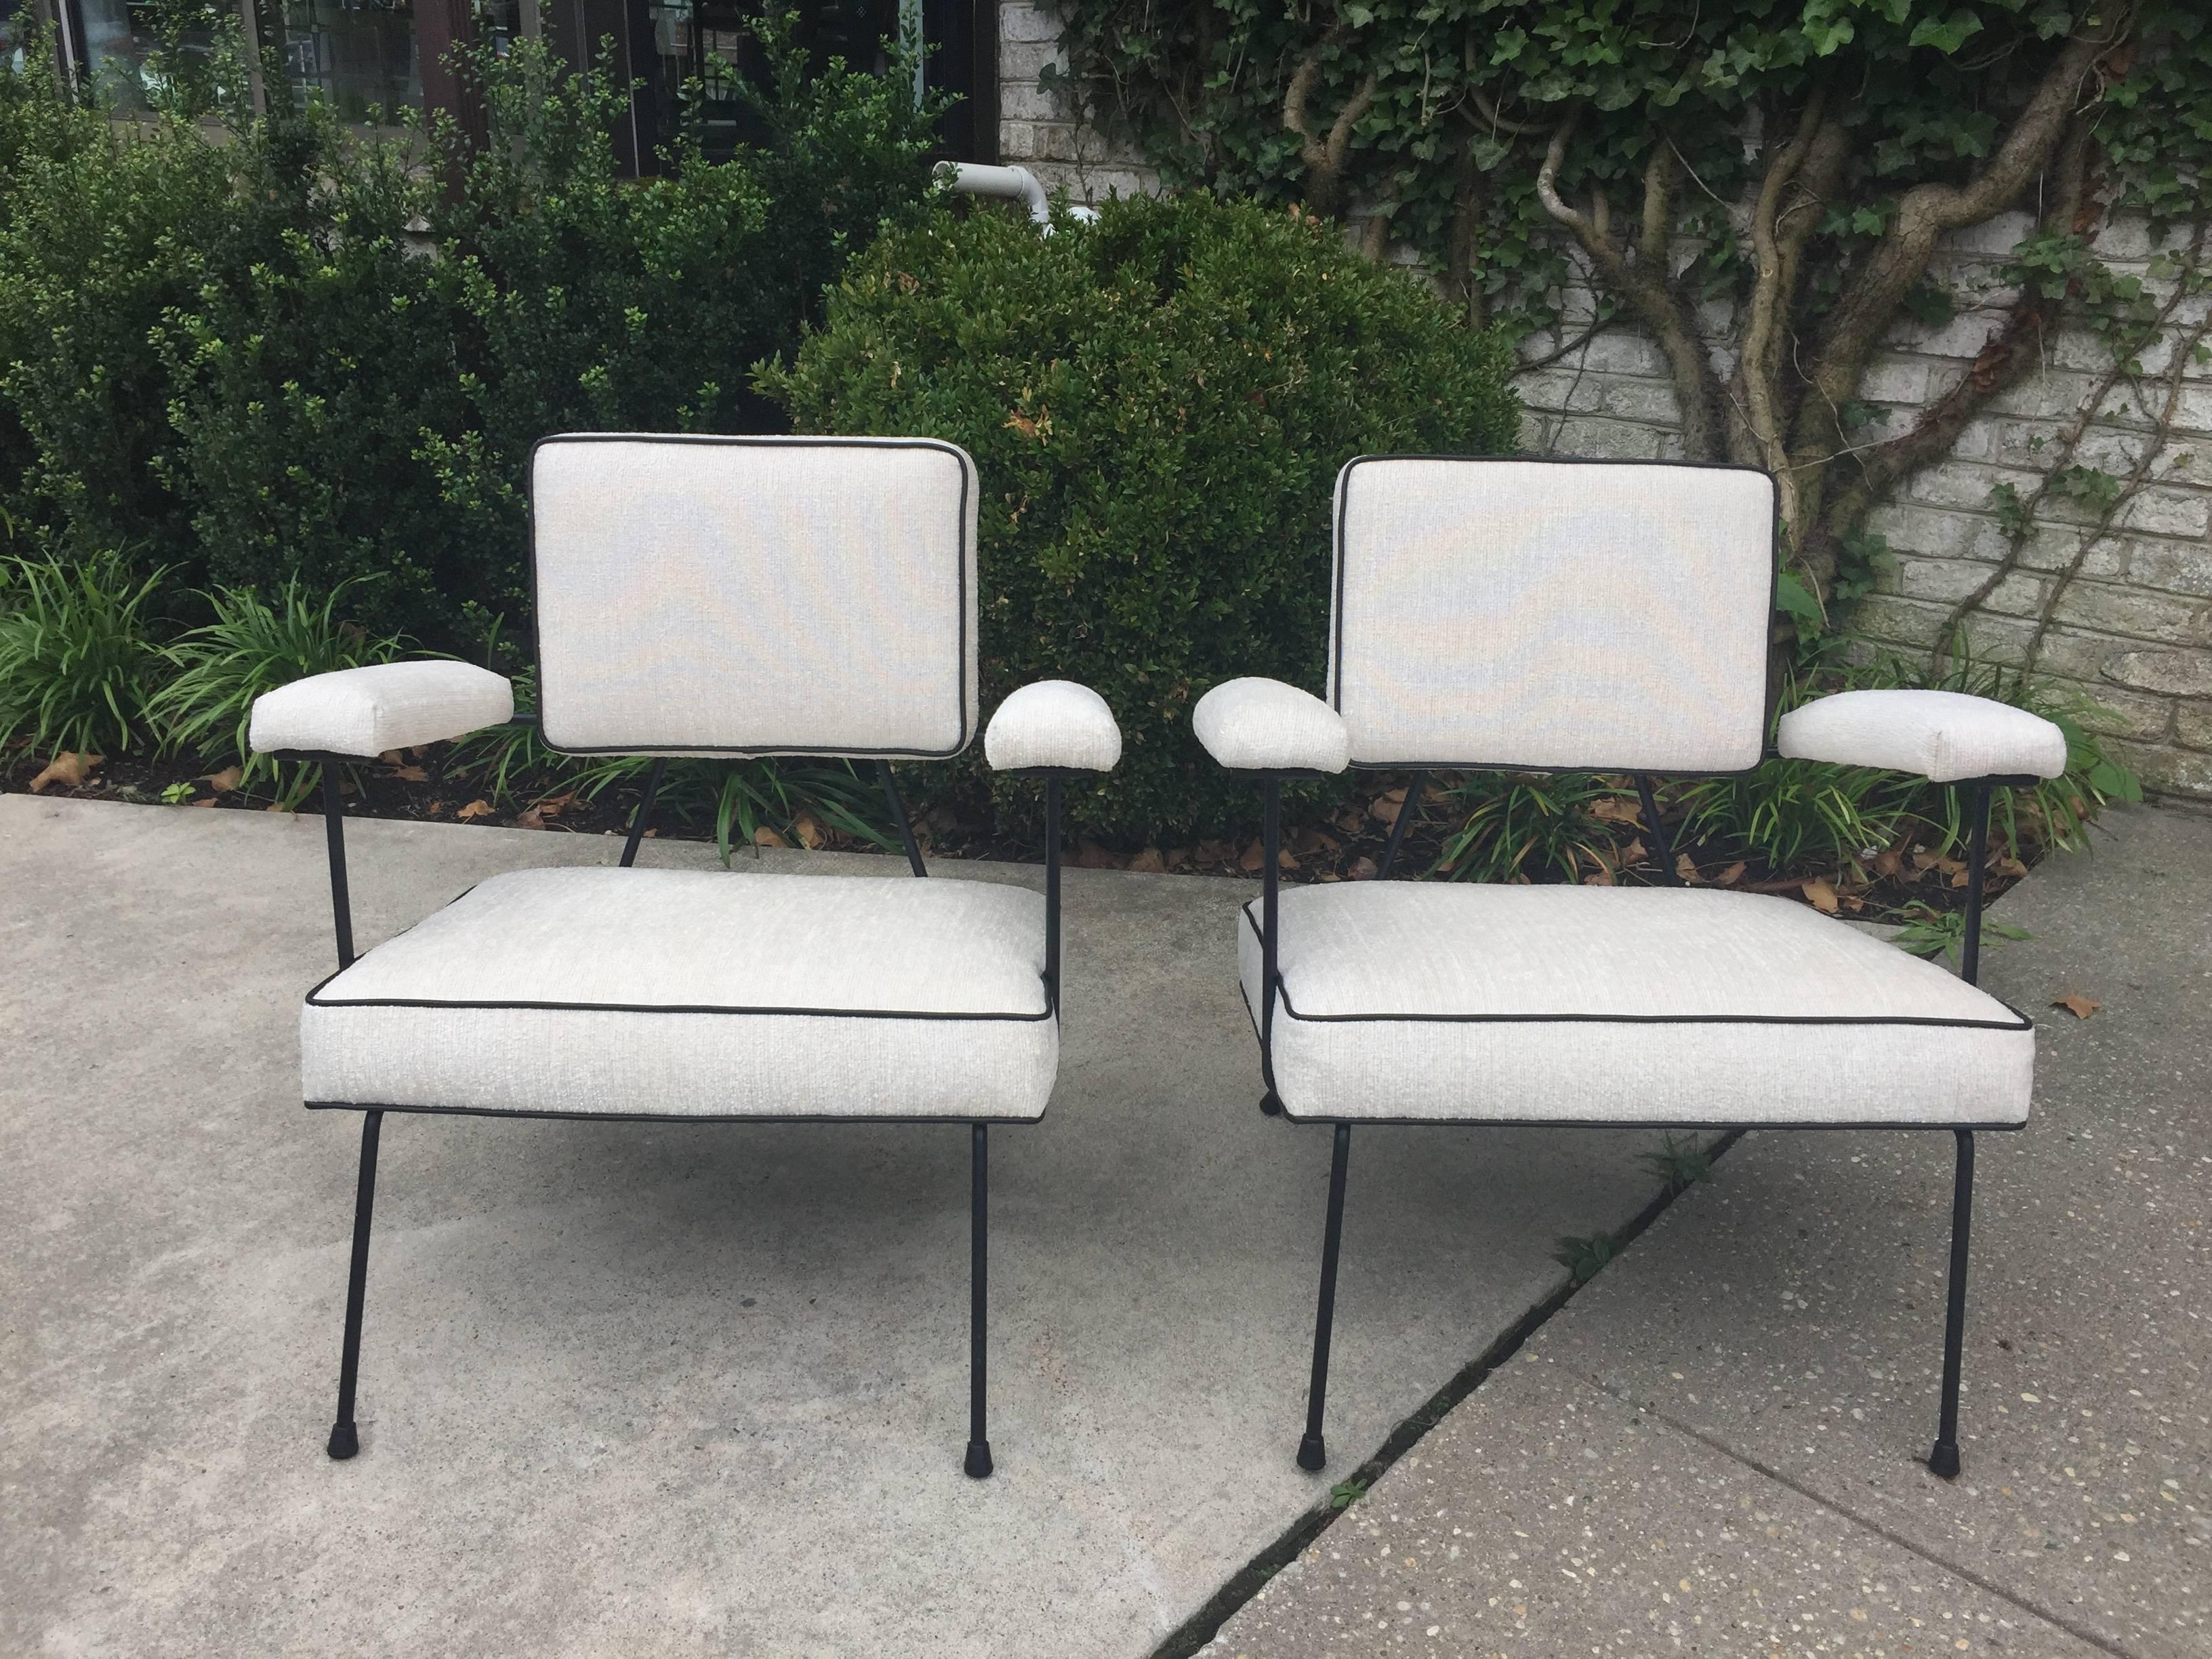 Beautifully restored in a luxe chenille ivory fabric with black leather piping.

Note: there is an additional lounge chair and ottoman of this set available.